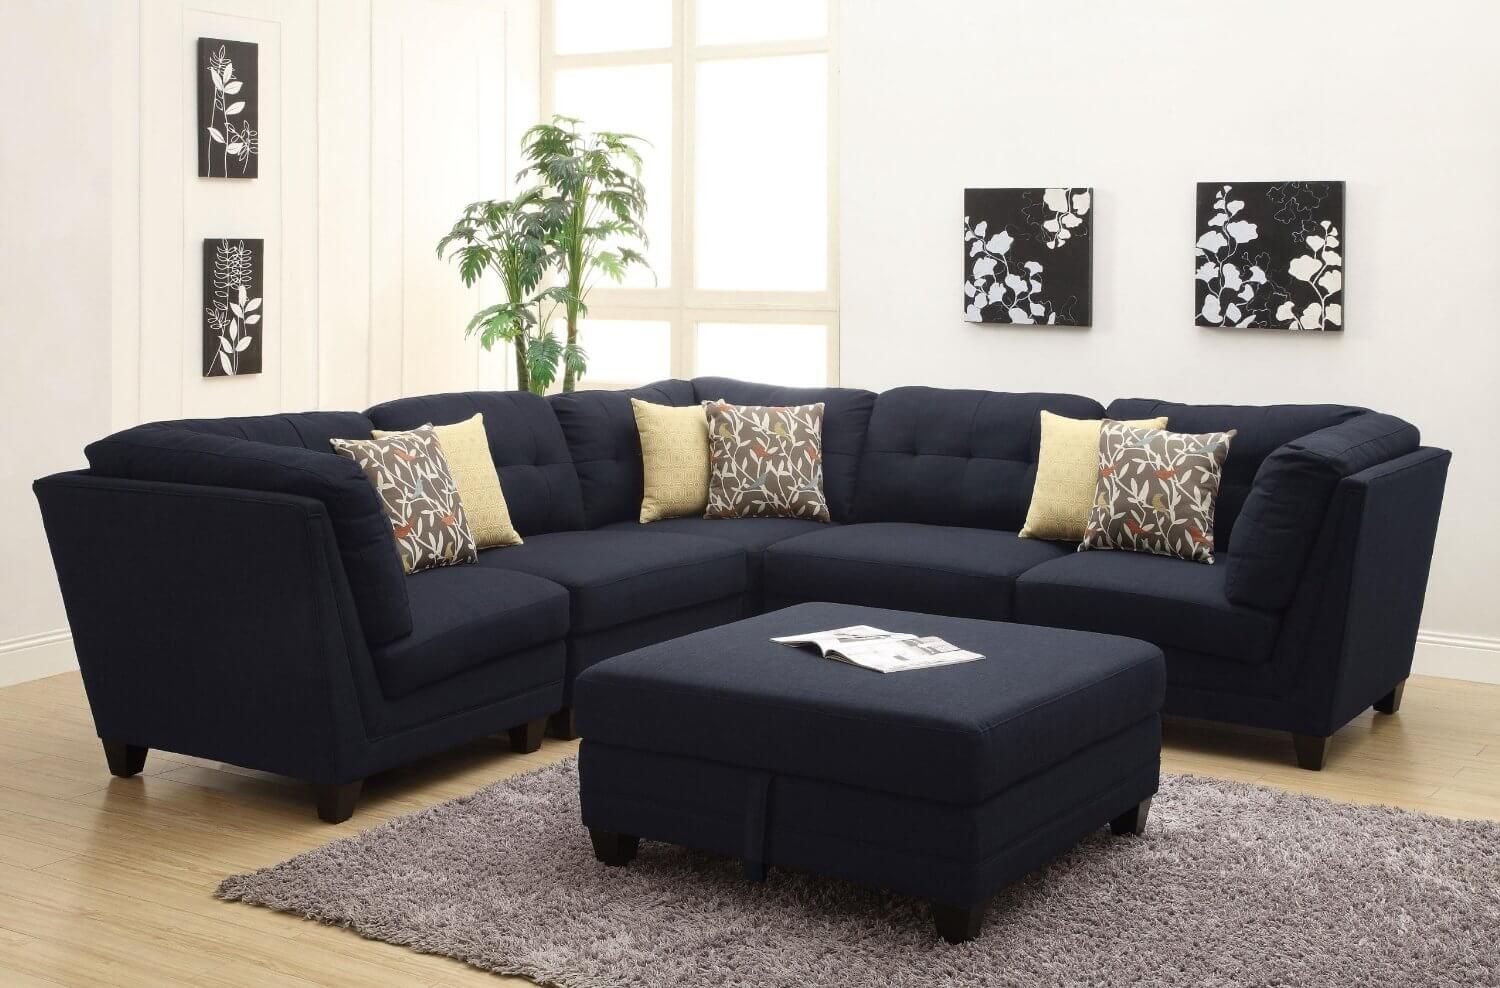 37 Beautiful Sectional Sofas Under $1,000 For Dream Navy 3 Piece Modular Sofas (View 8 of 15)